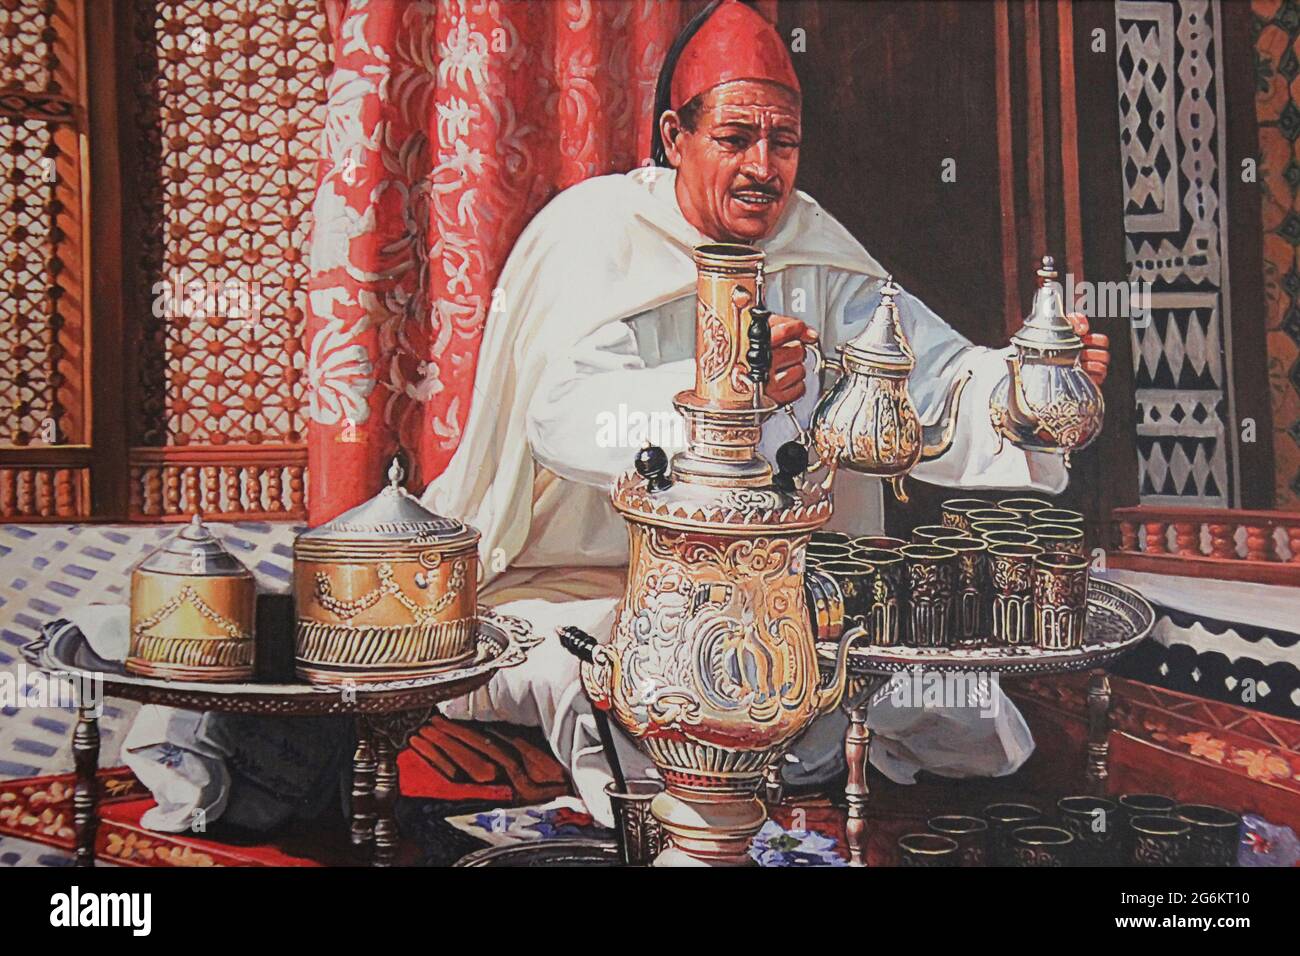 Moroccan Painting Of Traditionally Dressed Man Tea Ceremony Stock Photo